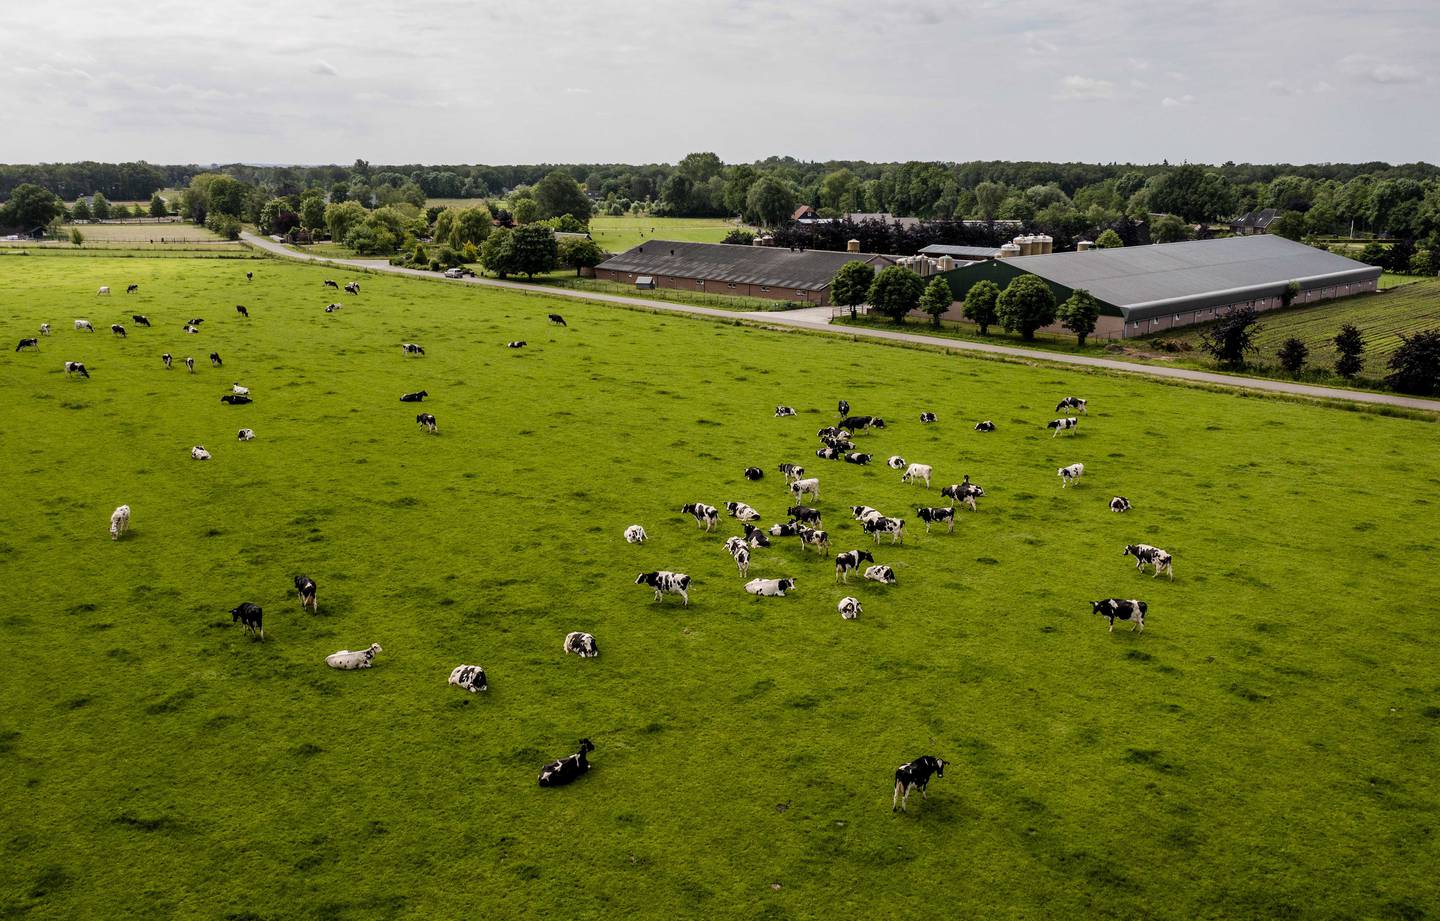 The agriculture industry is responsible for a 10th of greenhouse gas emissions in the UK. EPA